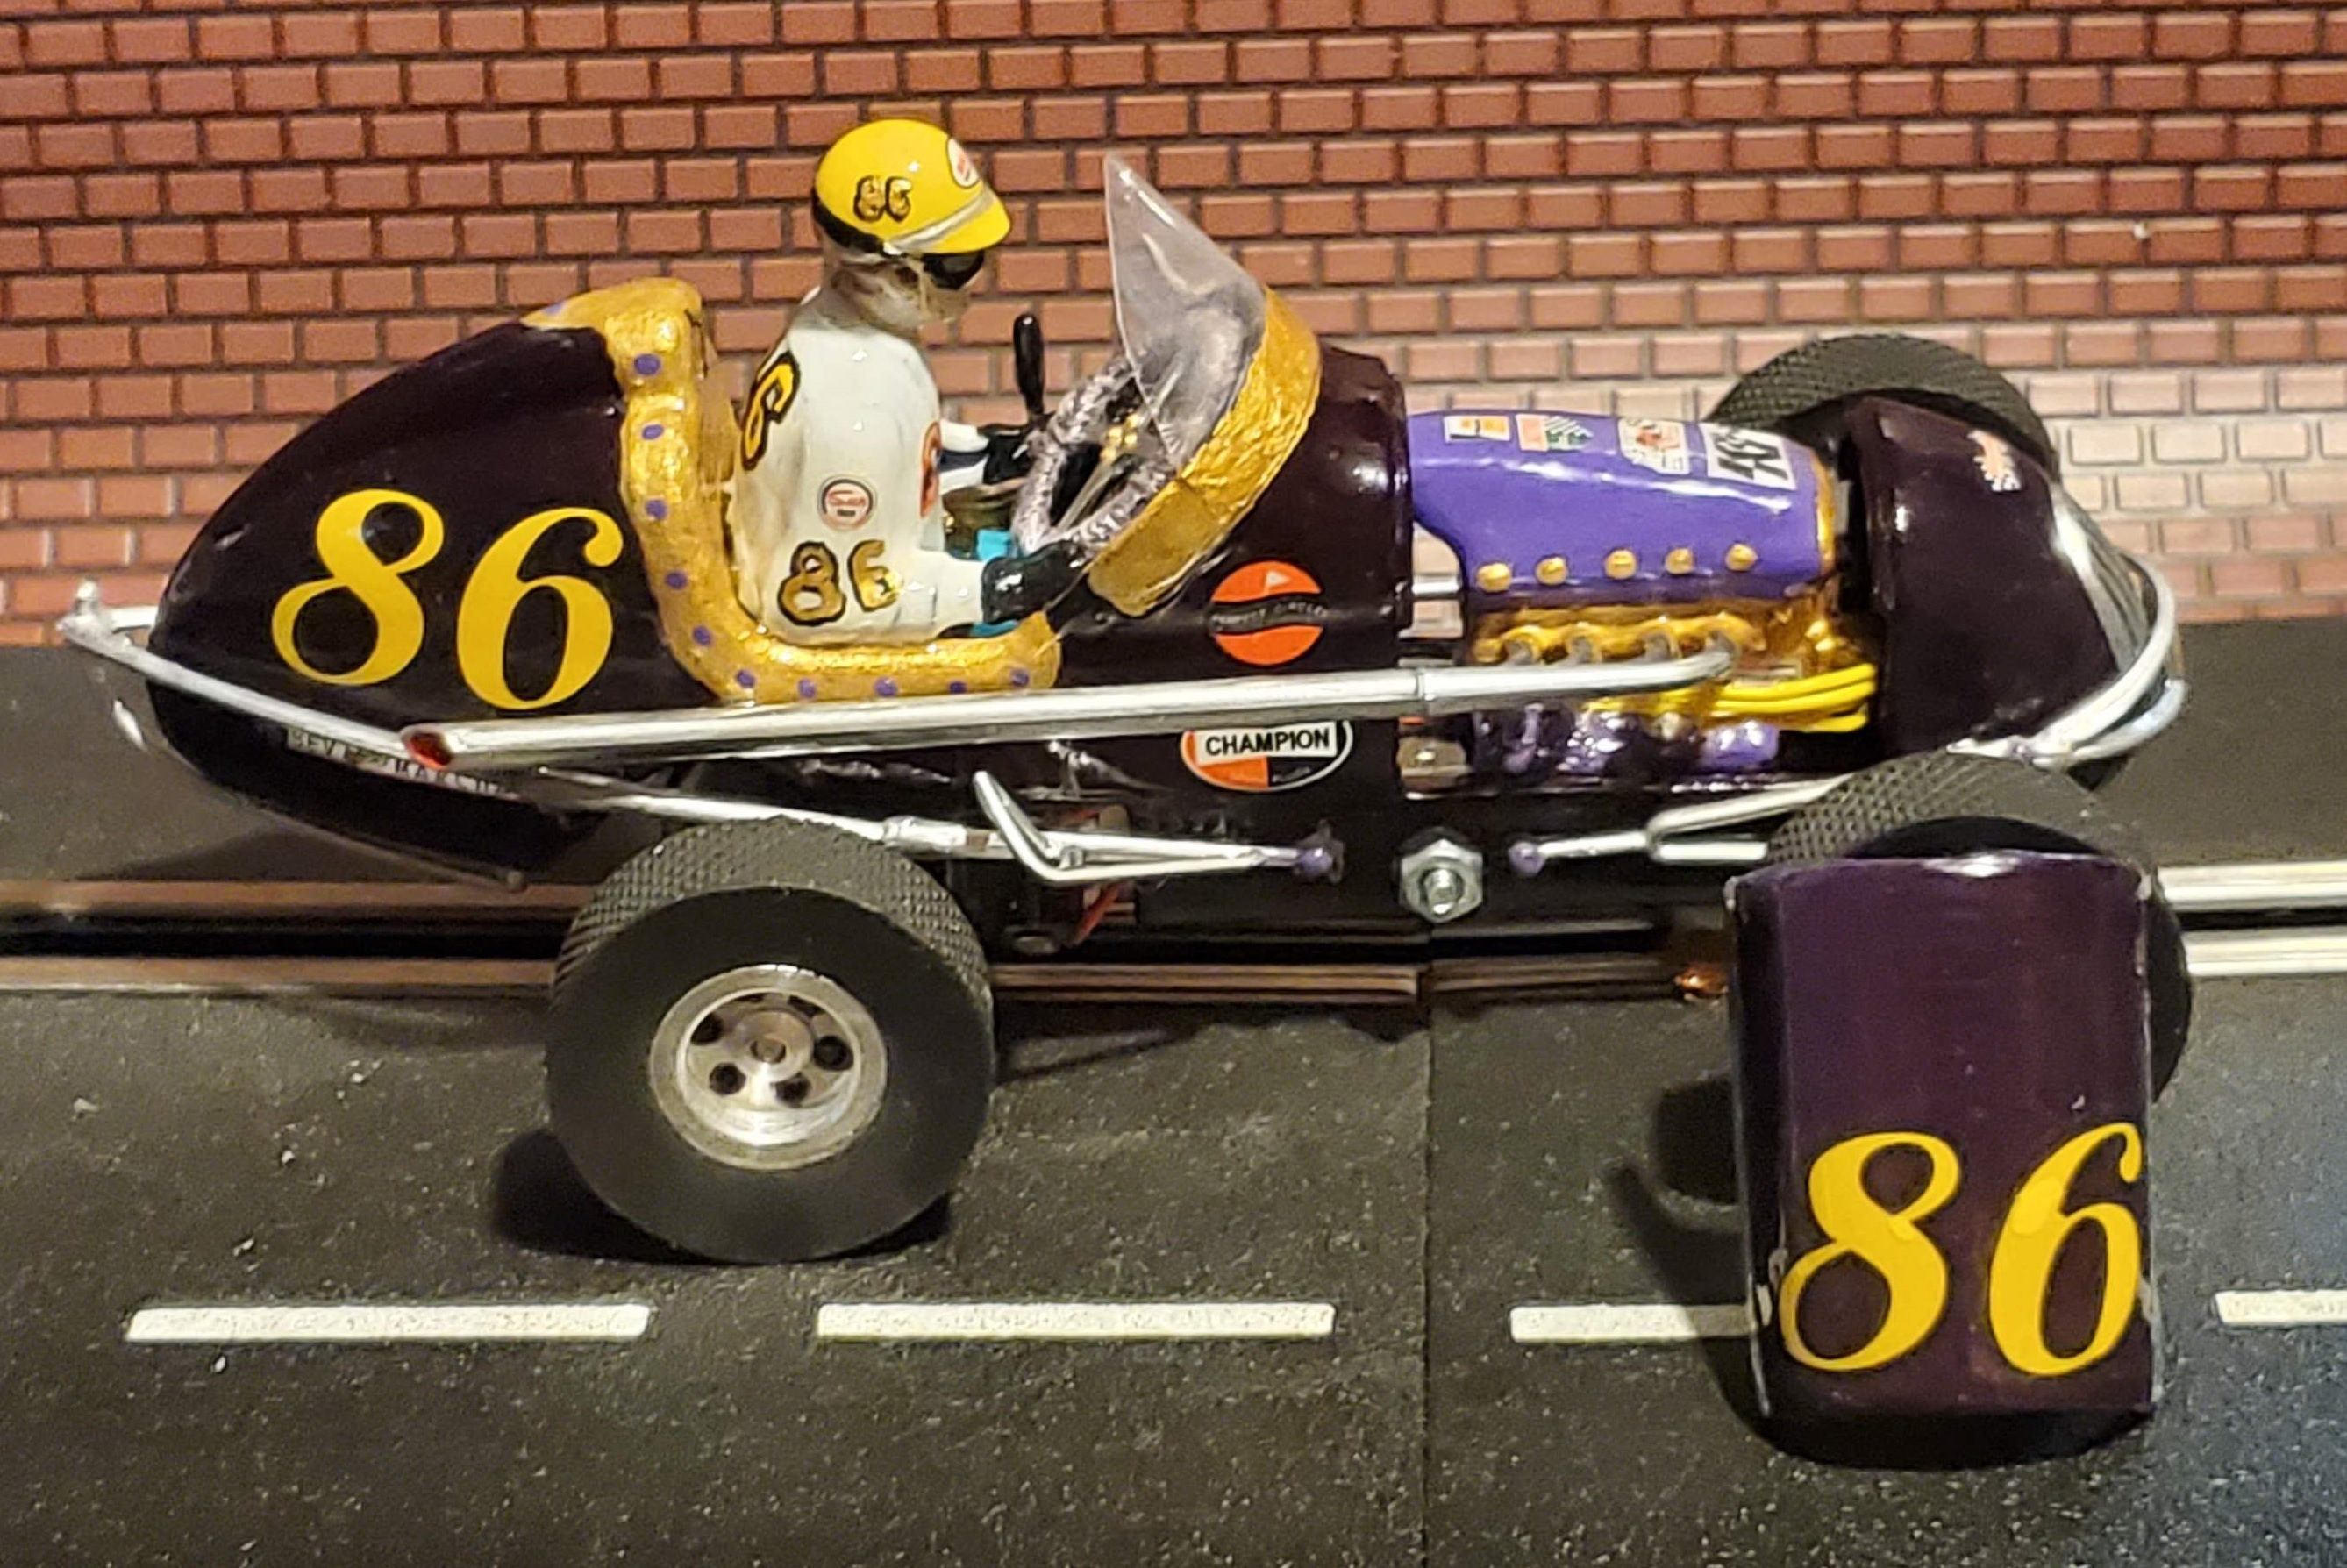 * SOLD 7/24/23 * * Save $100 vs. our $379.99 Ebay Store Price of $349.99 * Monogram Midget Racer “Deep 86” Royal Purple Racing Special Large Scale Slot Car 86